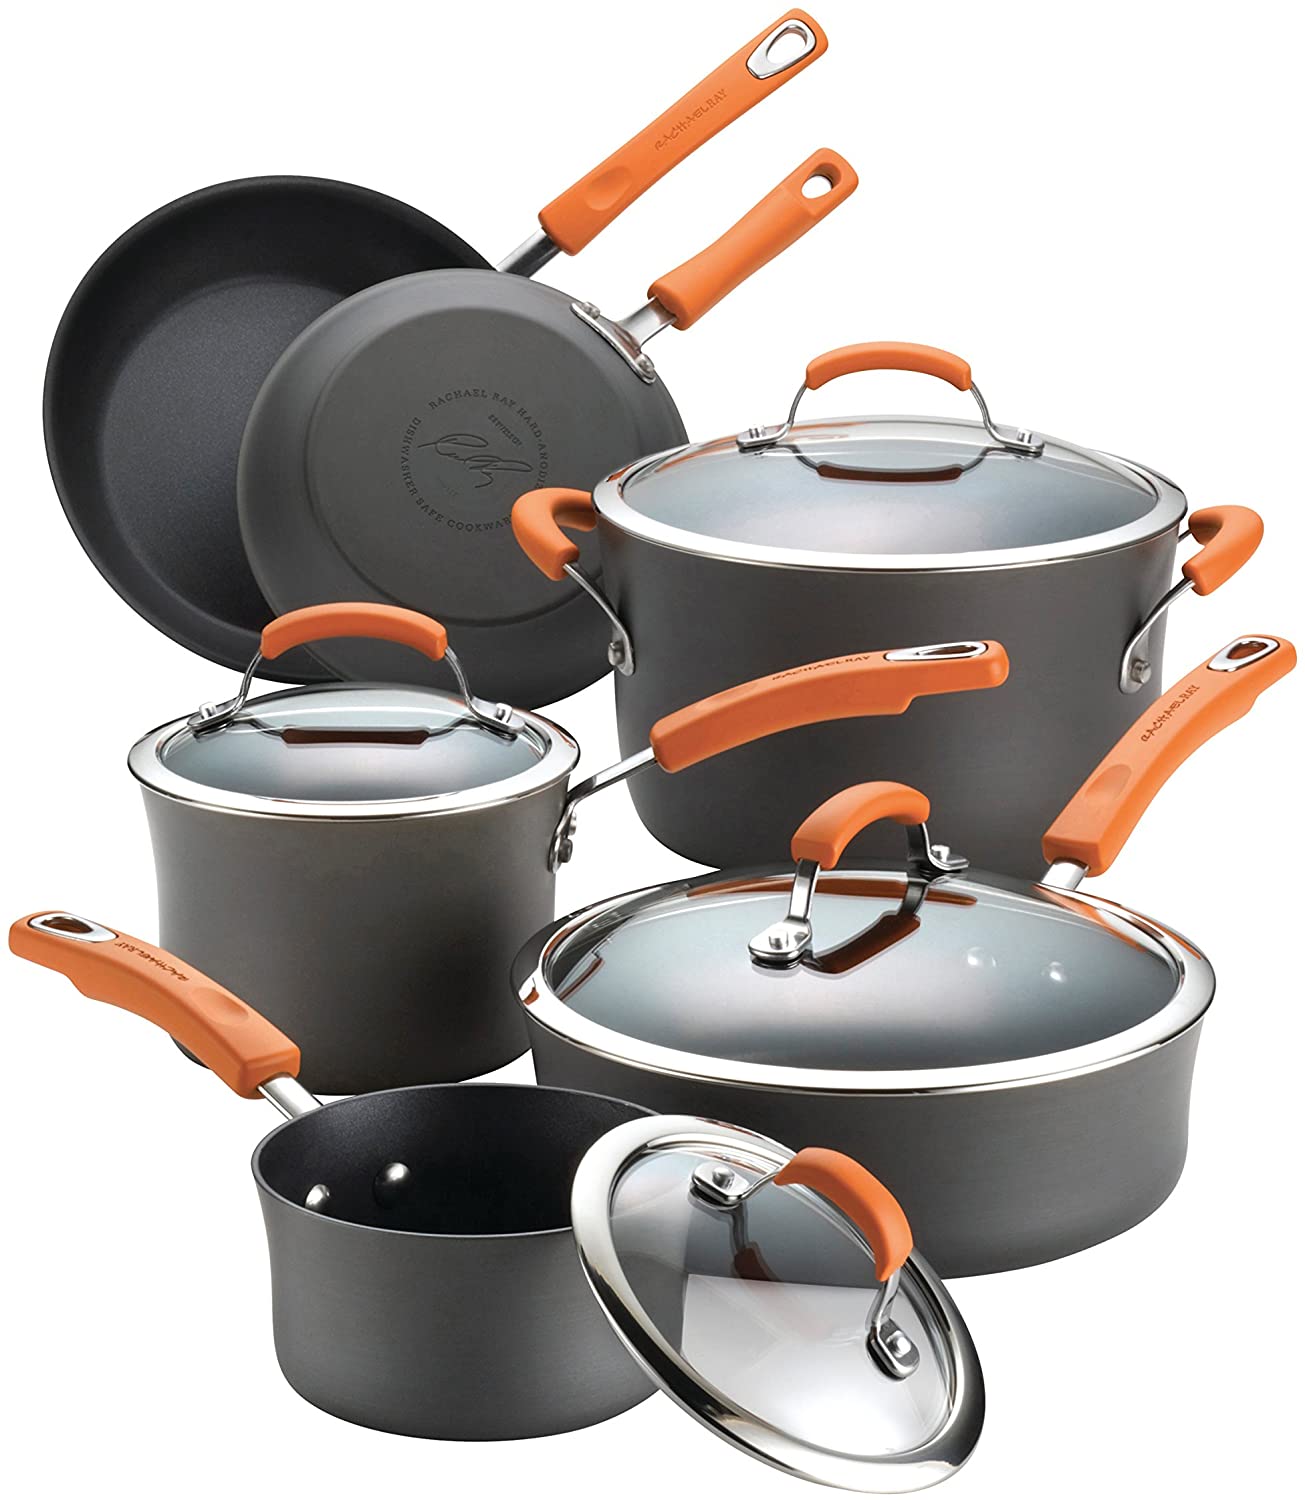 Details about   Culinary Edge 8 Pieces Aluminum Non Stick Cookware Set in Orange 